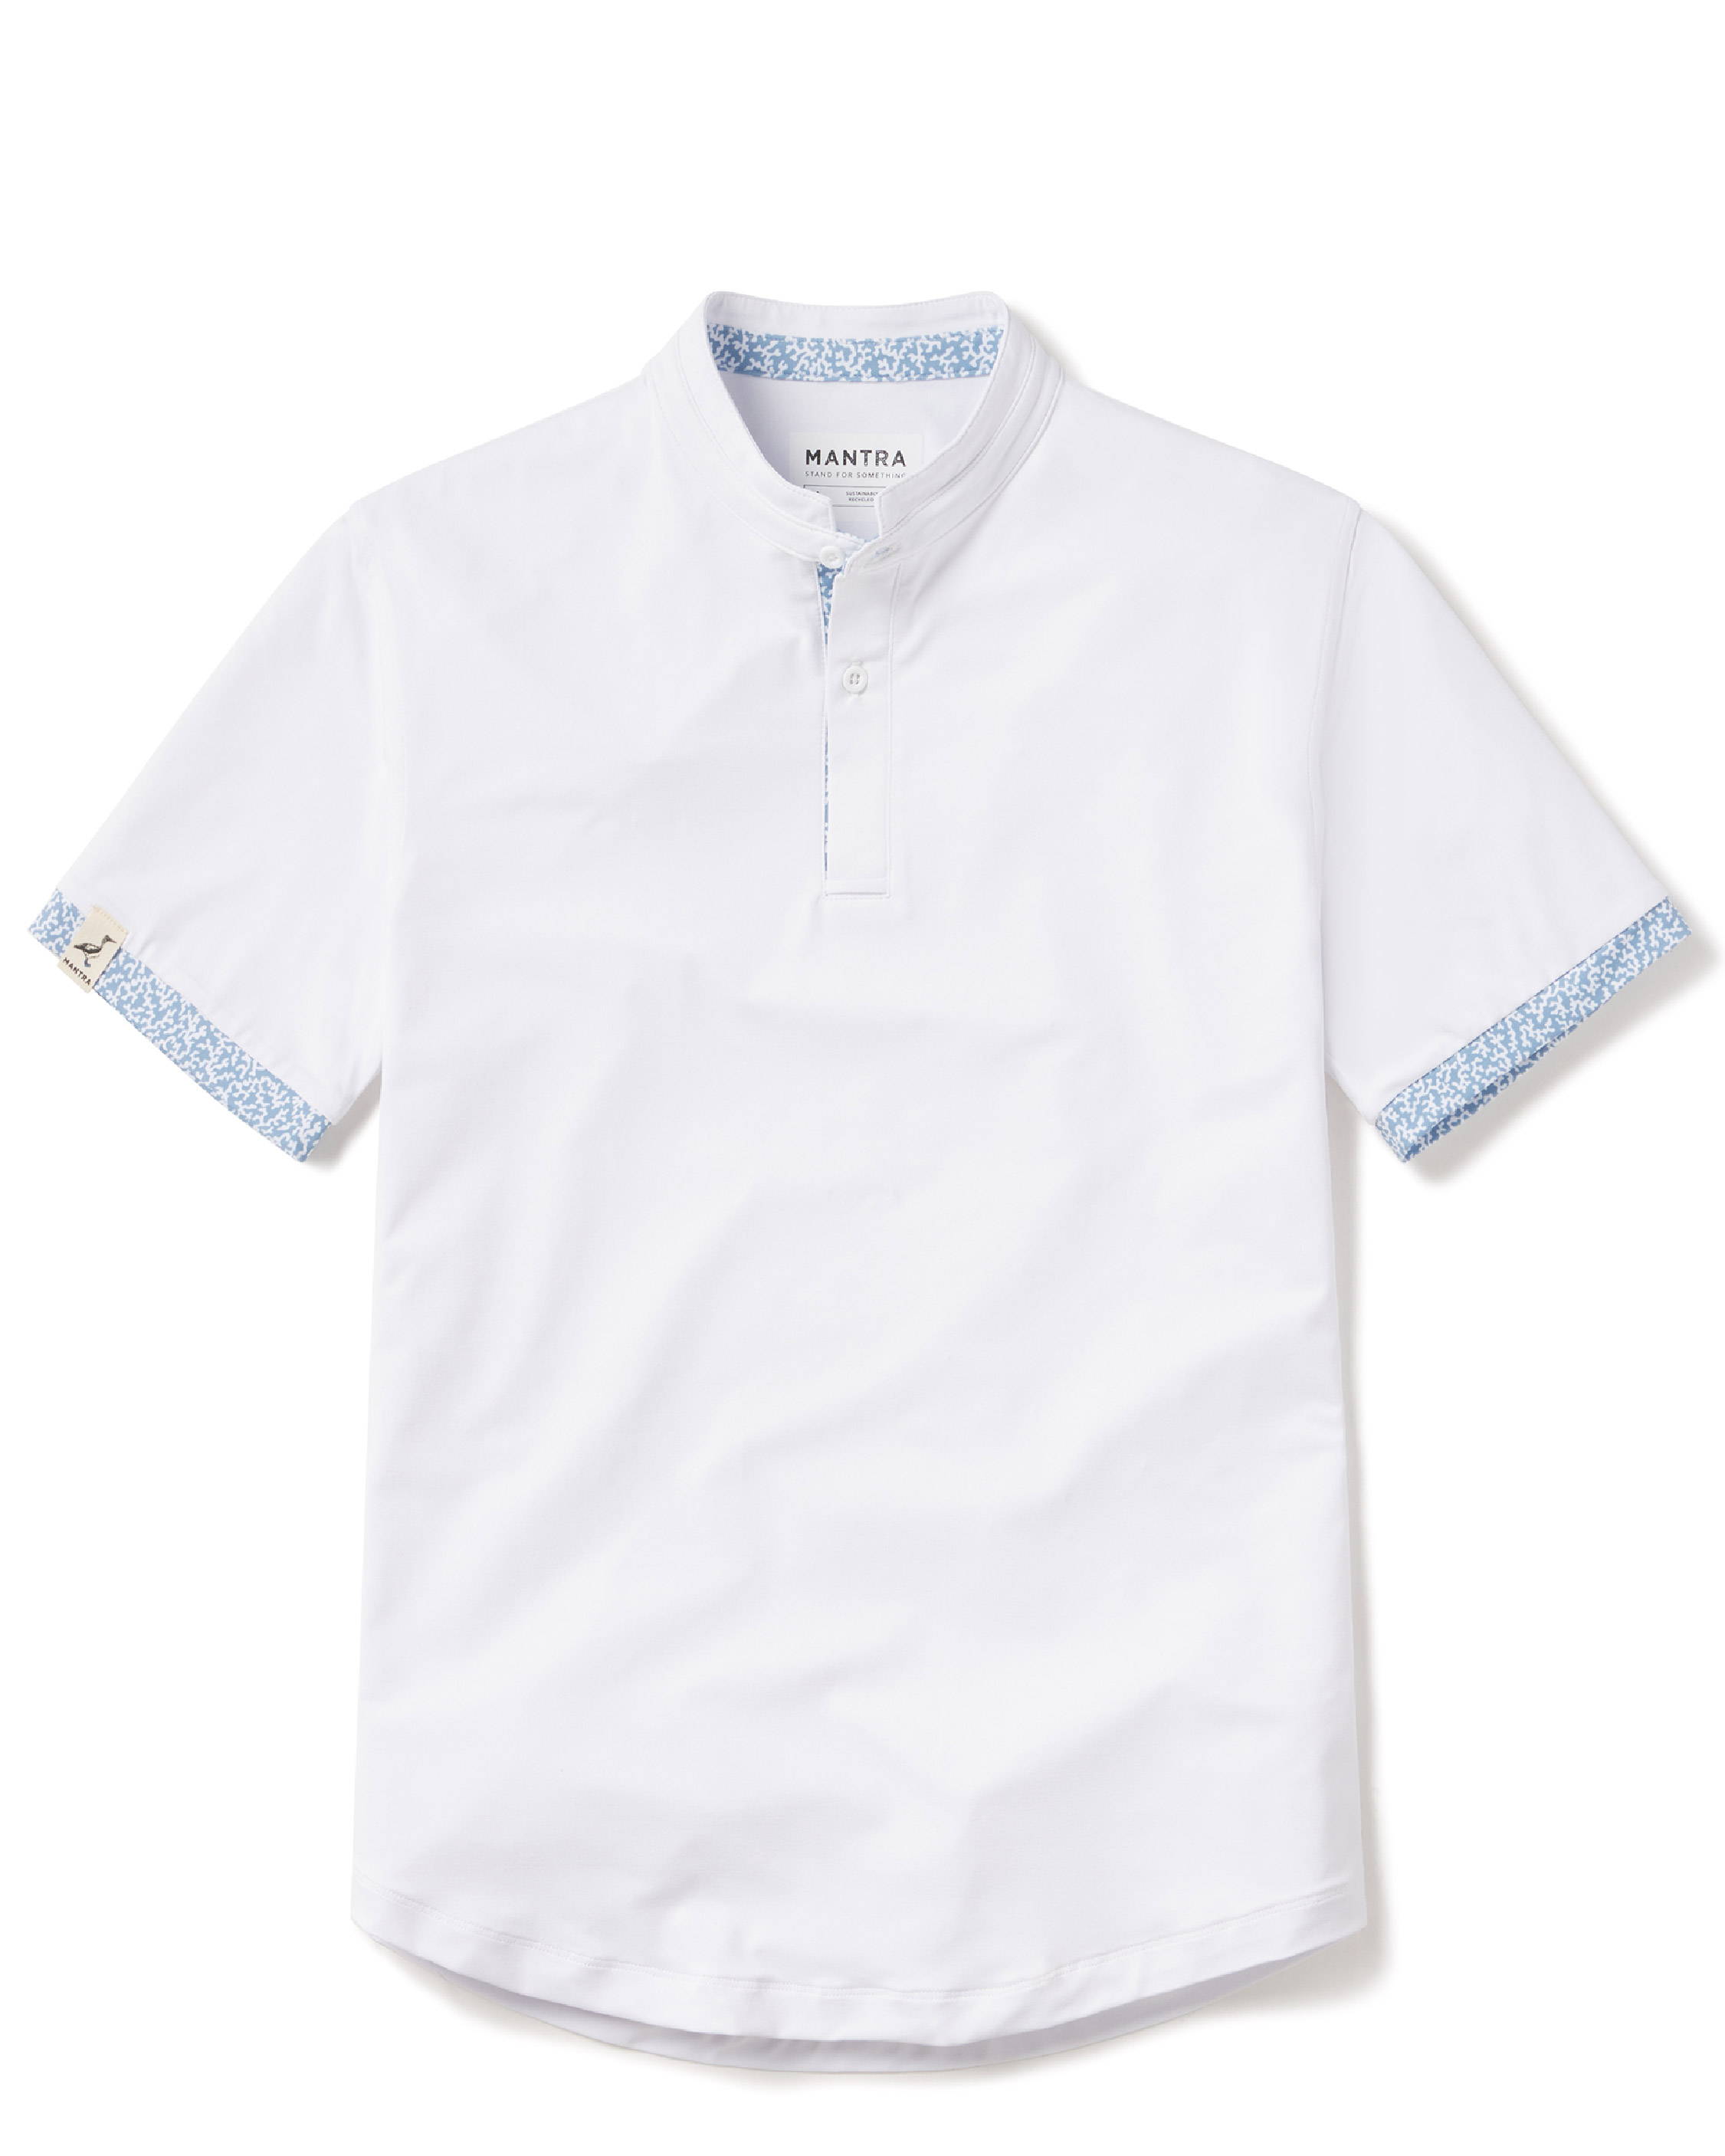 MANTRA CORAL CONTRAST Polo - sustainable mens performance polo made from recycled materials